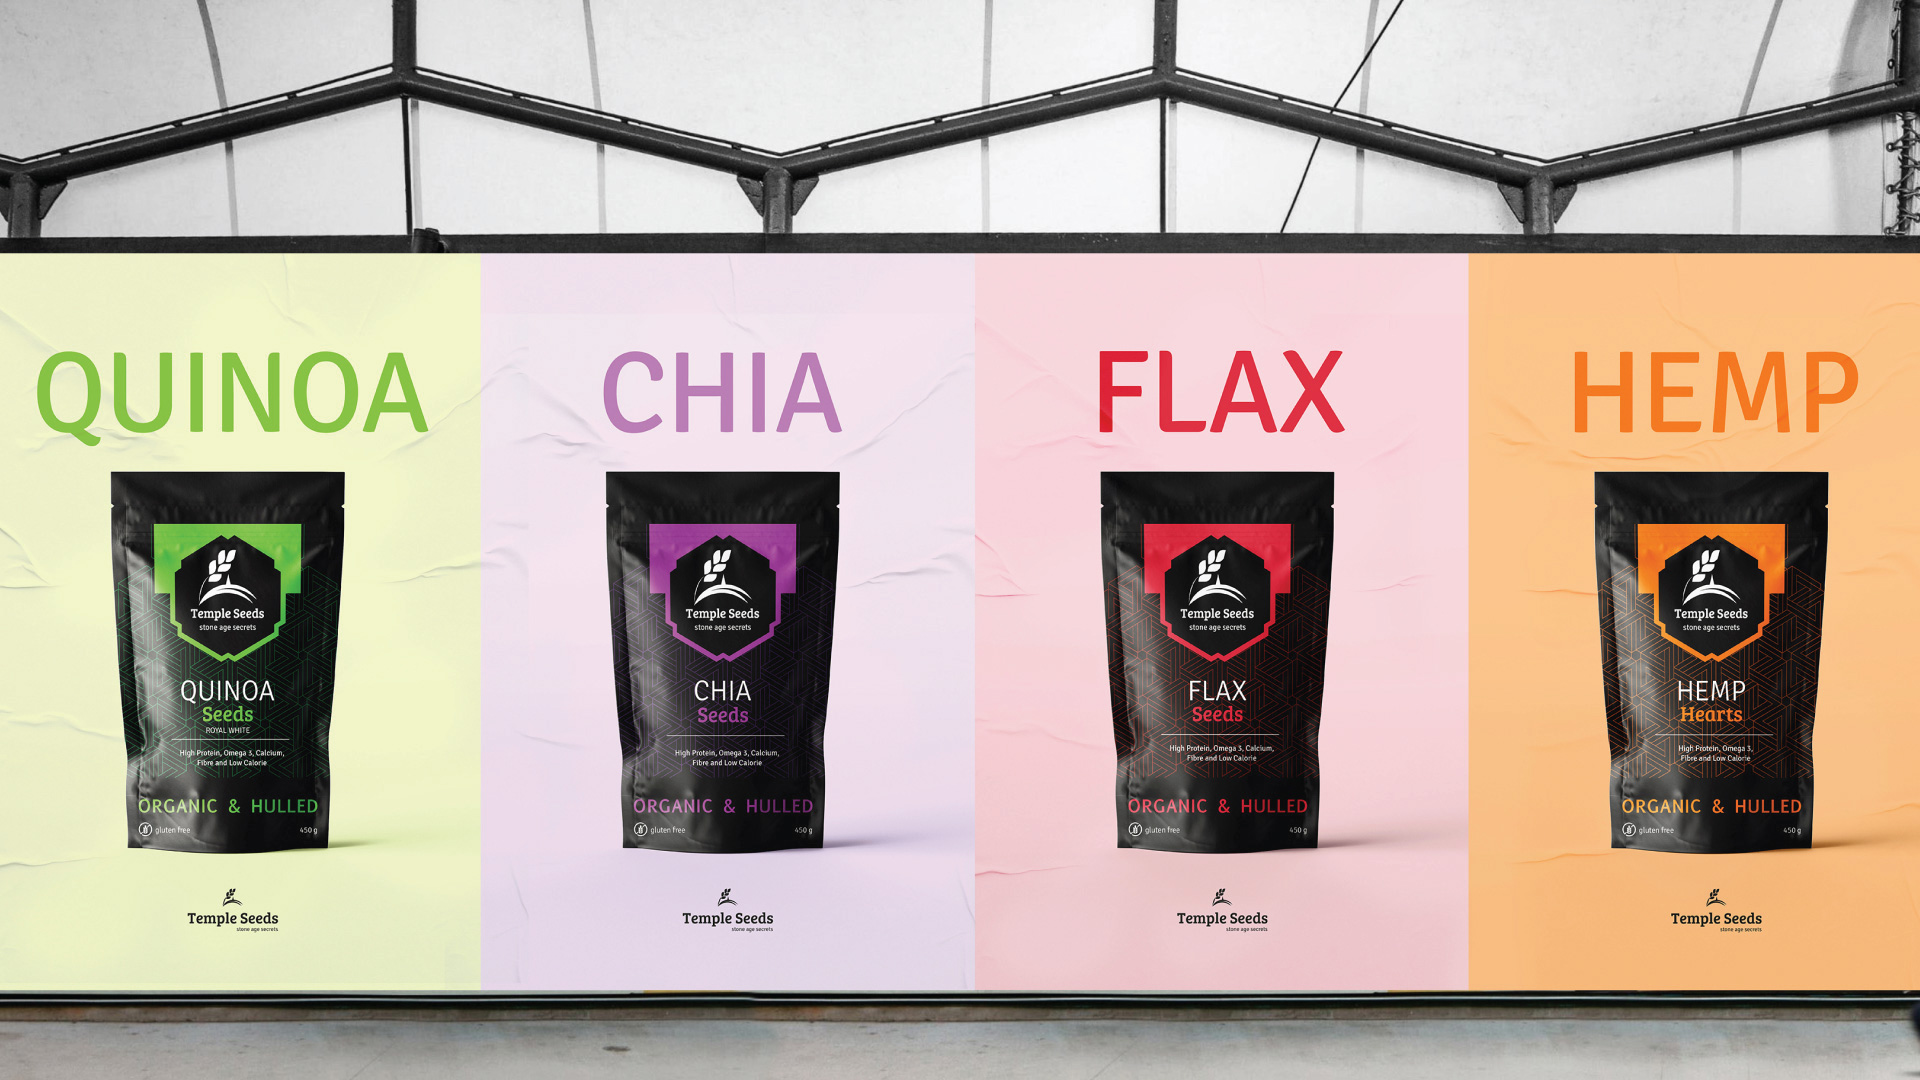 4 Posters of single packages of seeds. The quinoa is in green, chia in purple, flax in red and hemp in orange